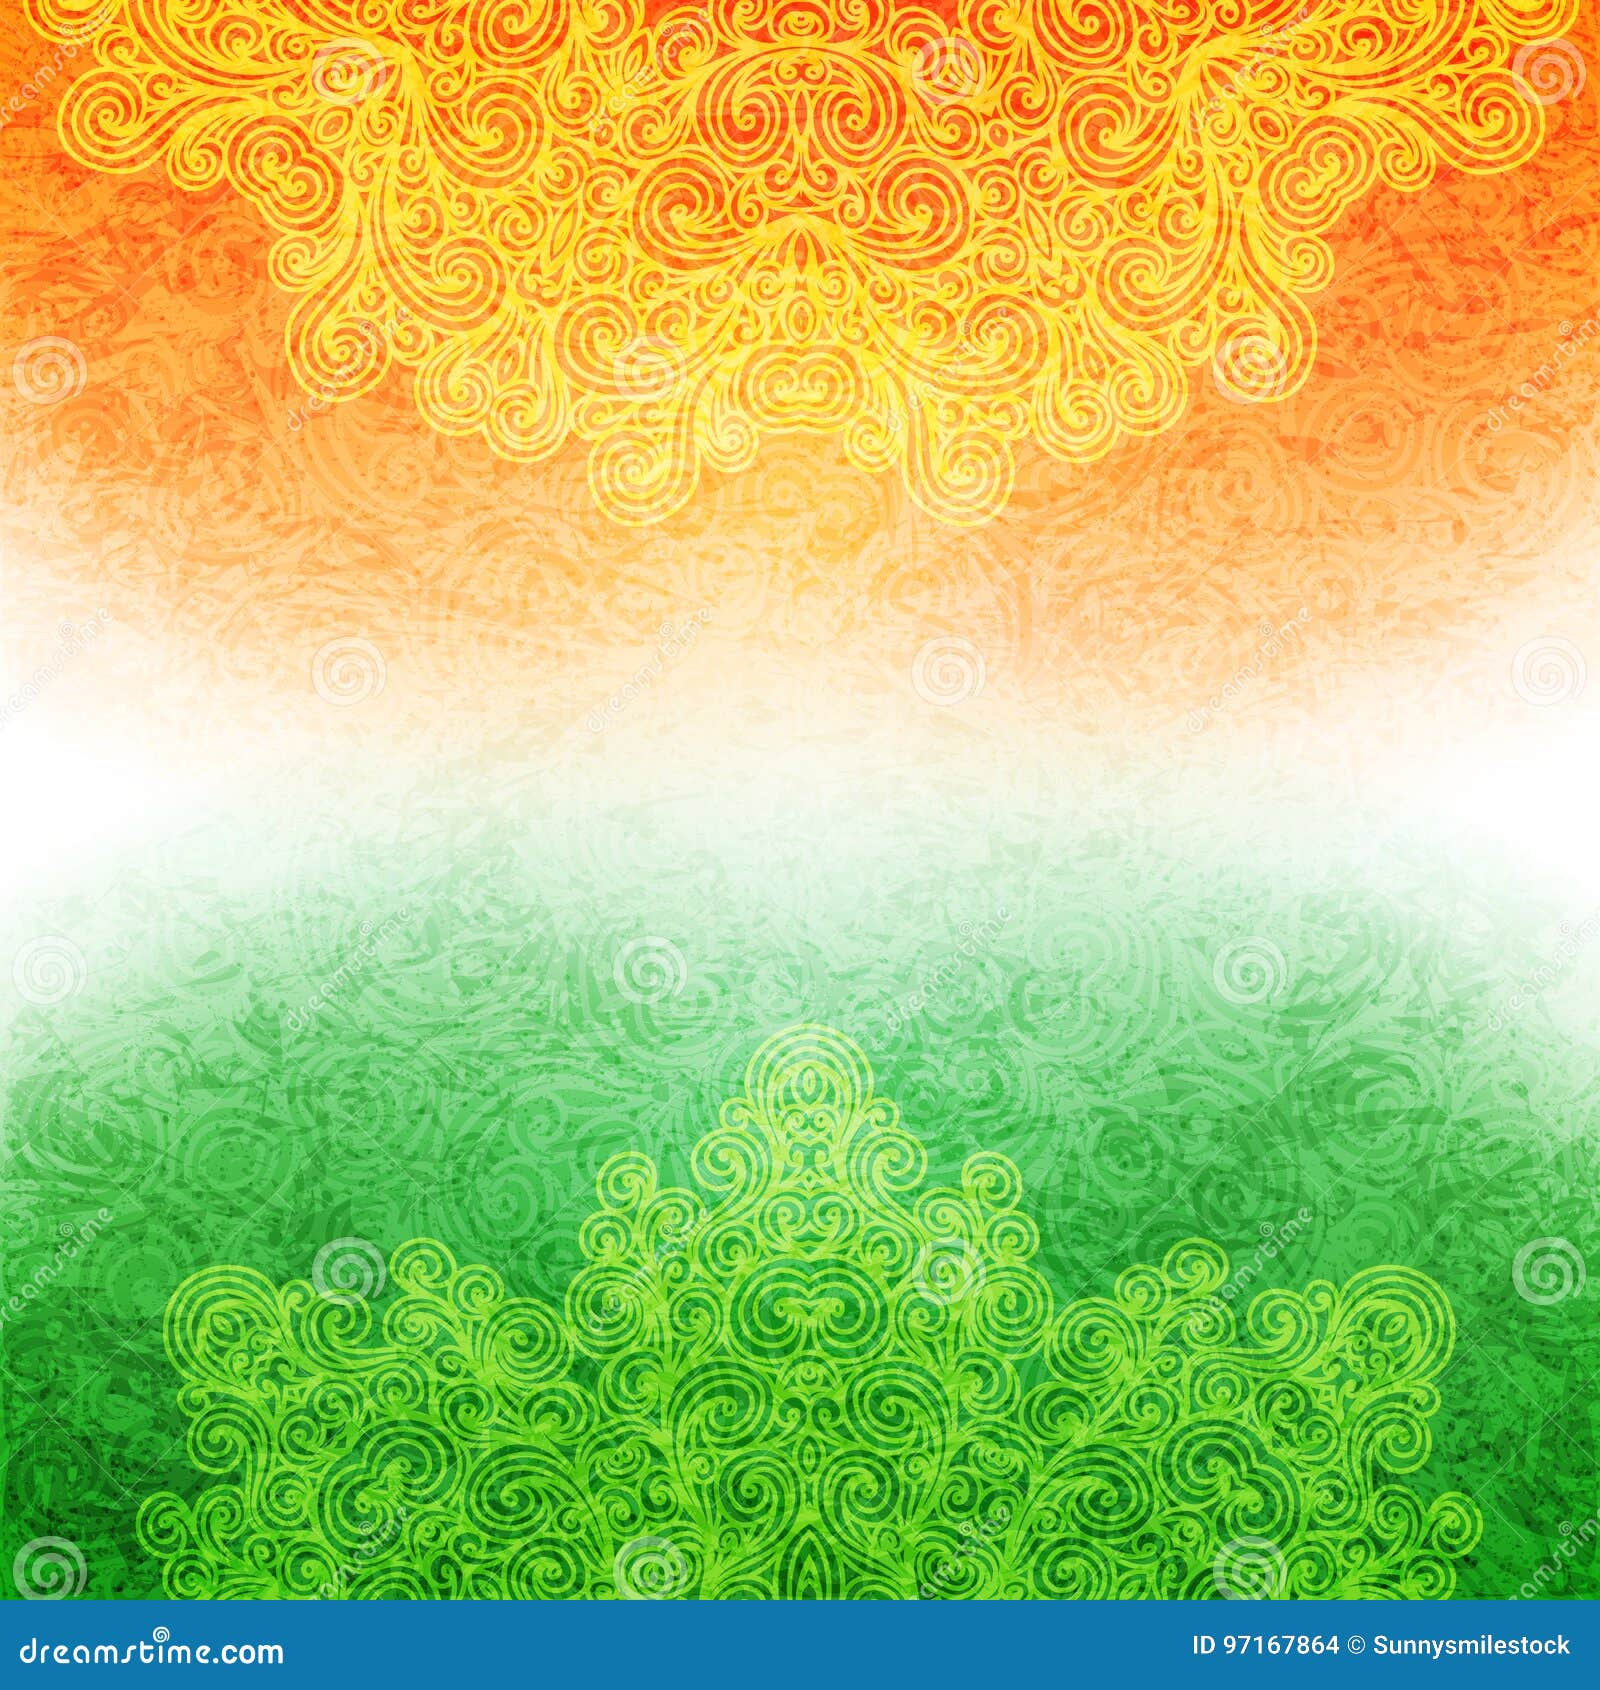 Indian Background Images HD Pictures and Wallpaper For Free Download   Pngtree